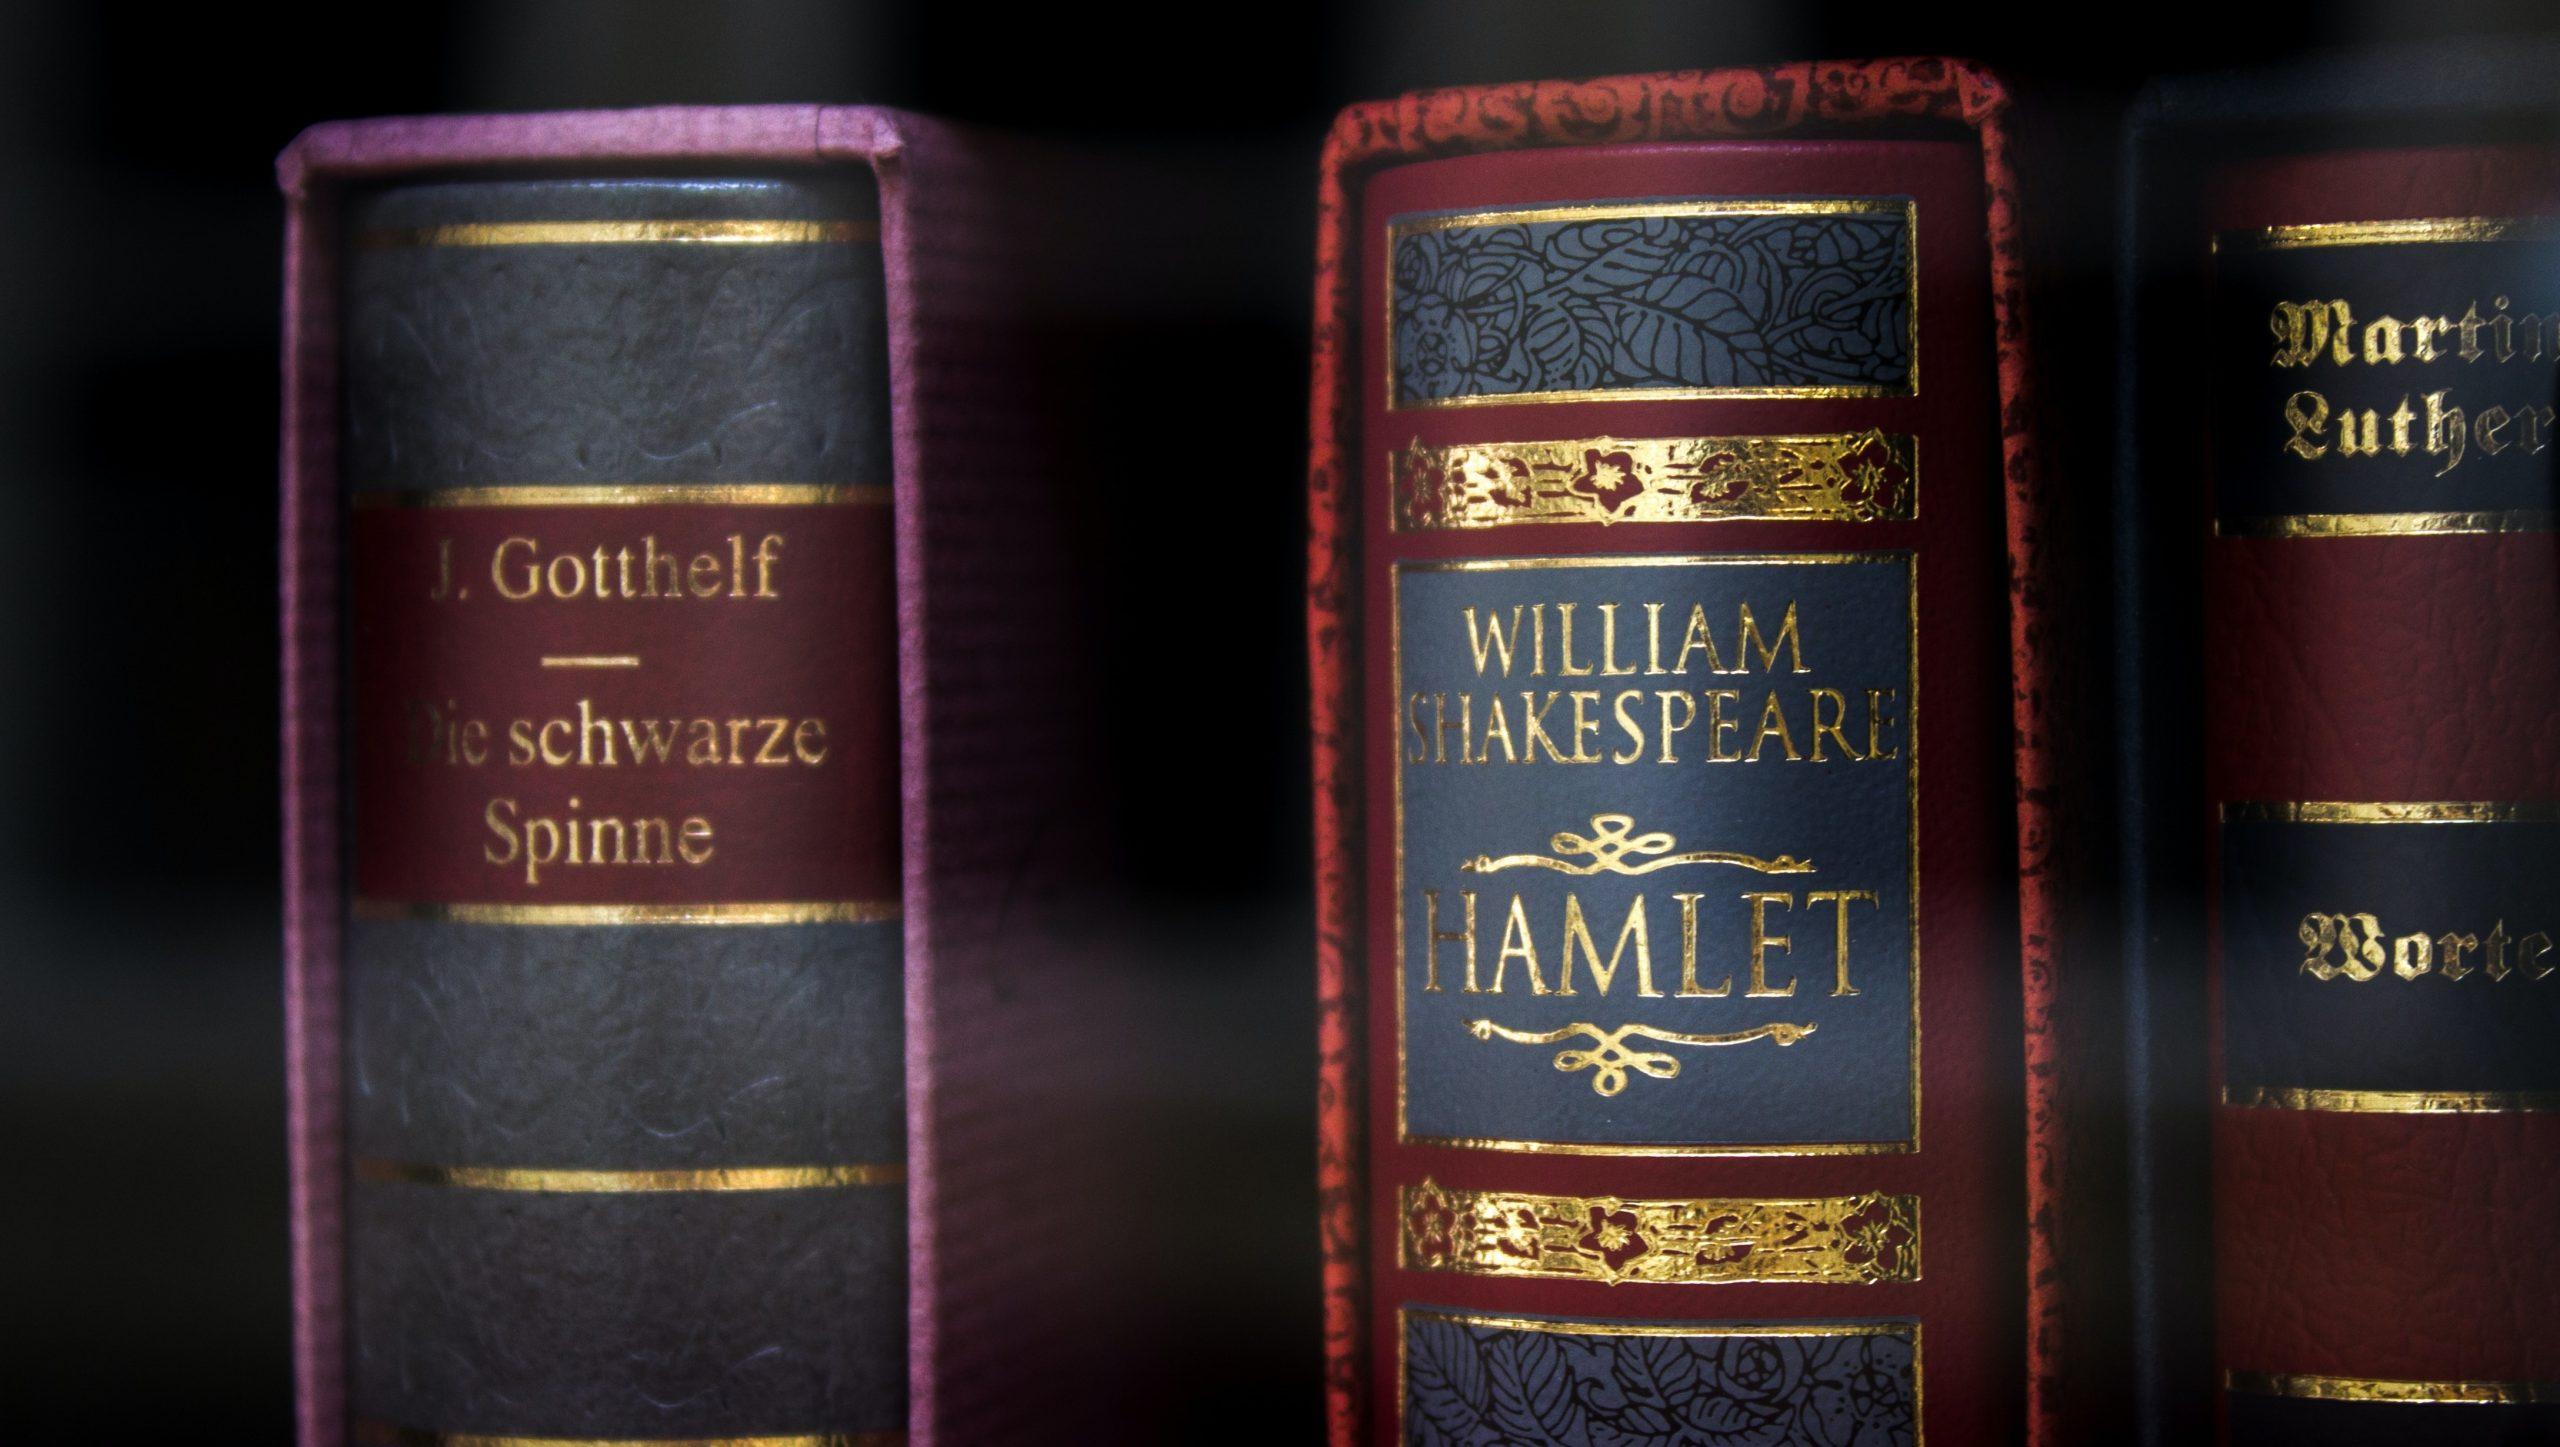 Copy of Hamlet among other old books on a shelf.